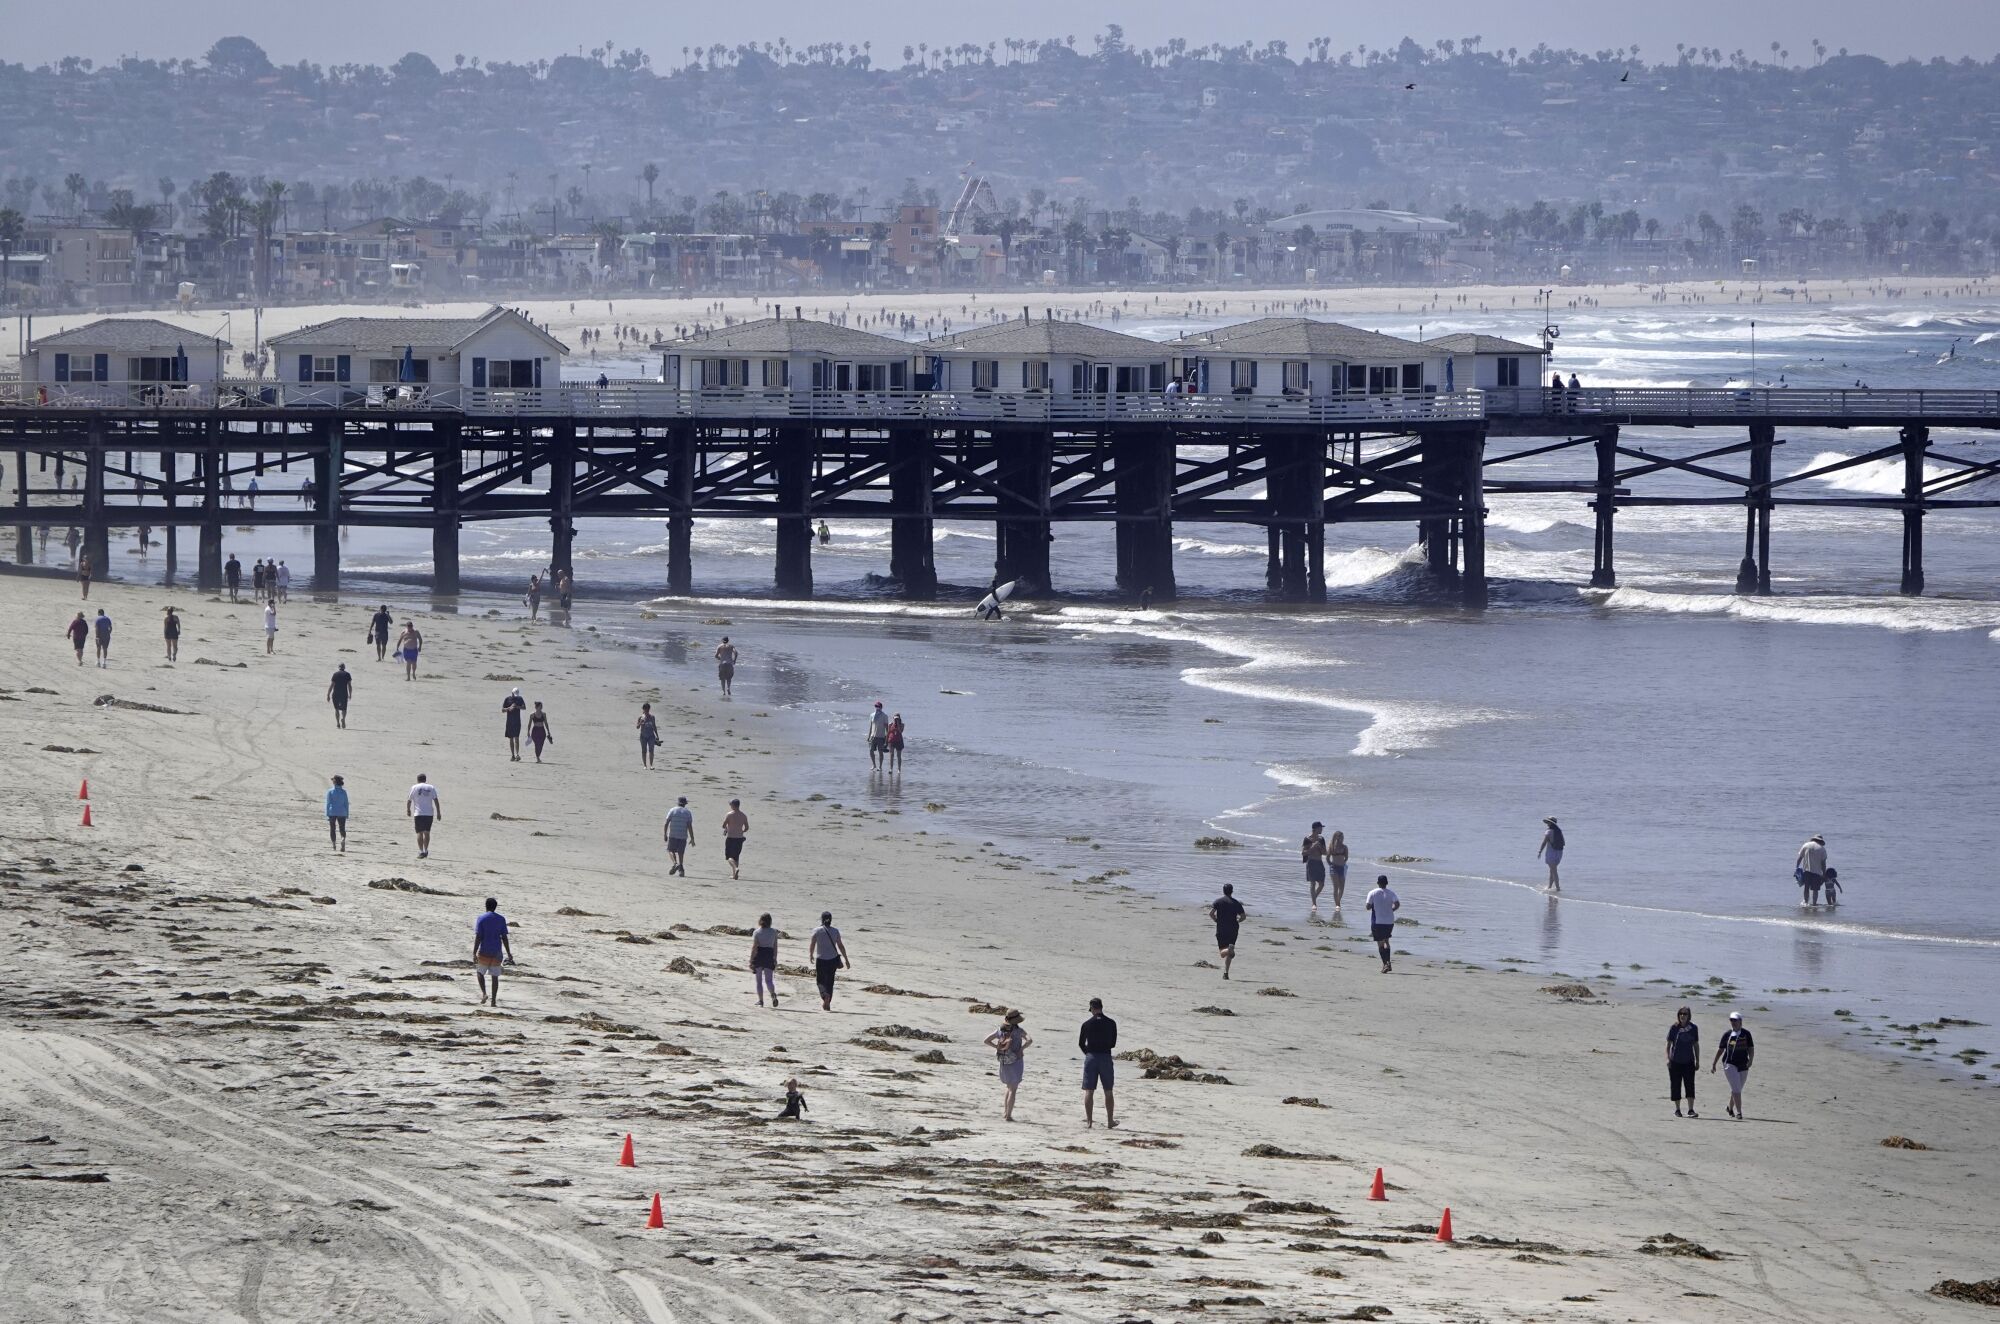 People walk along the coast in Pacific Beach after local beaches reopened to activities such as walking, running, and surfing on April 27, 2020. Beaches have been closed for several weeks due to the coronavirus. The boardwalks and congregating on the sand are still prohibited.